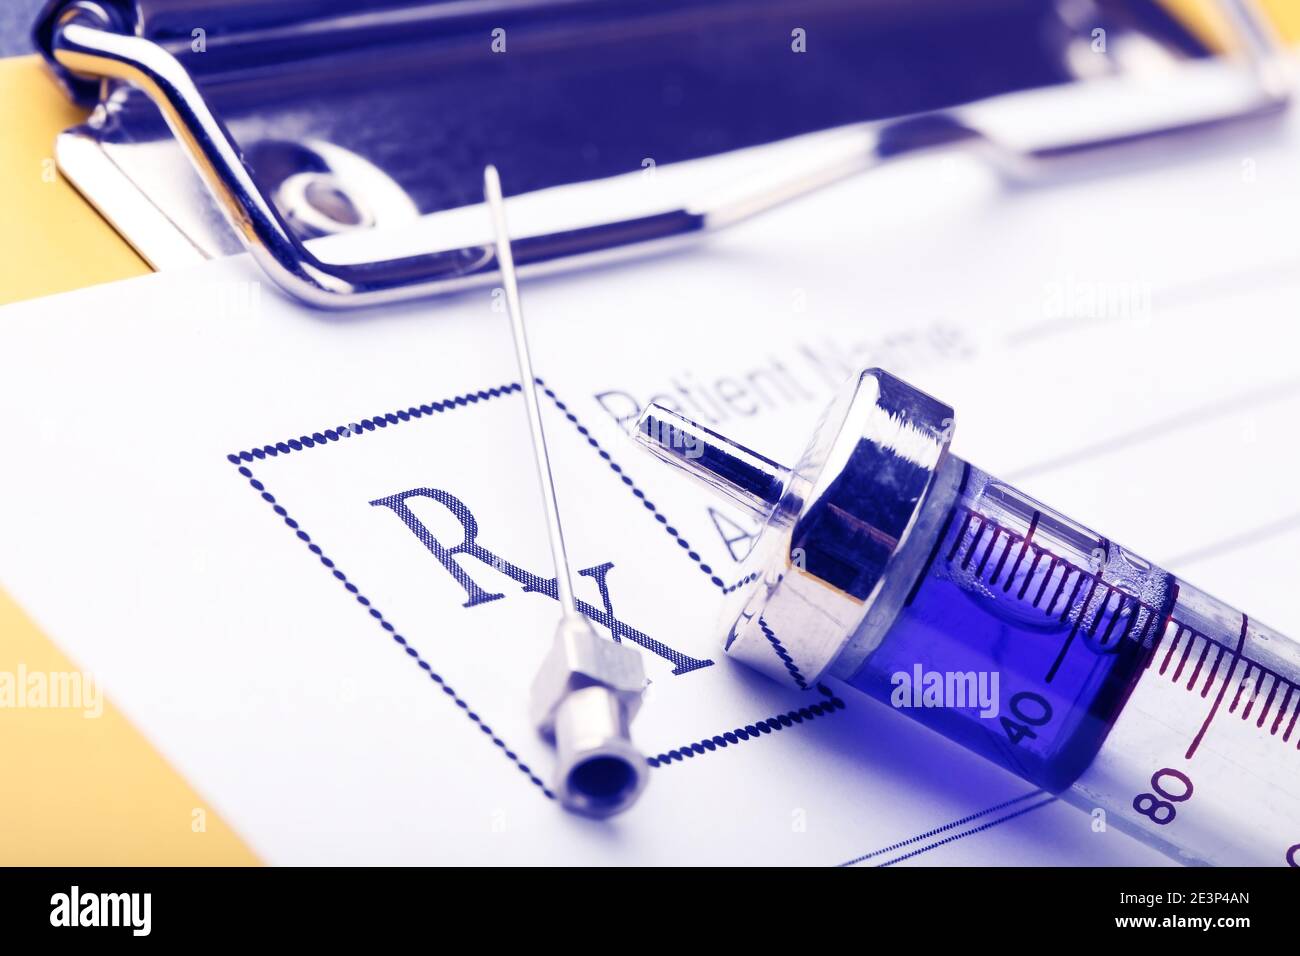 Prescription form and full with blue drug syringe close-up. Stock Photo